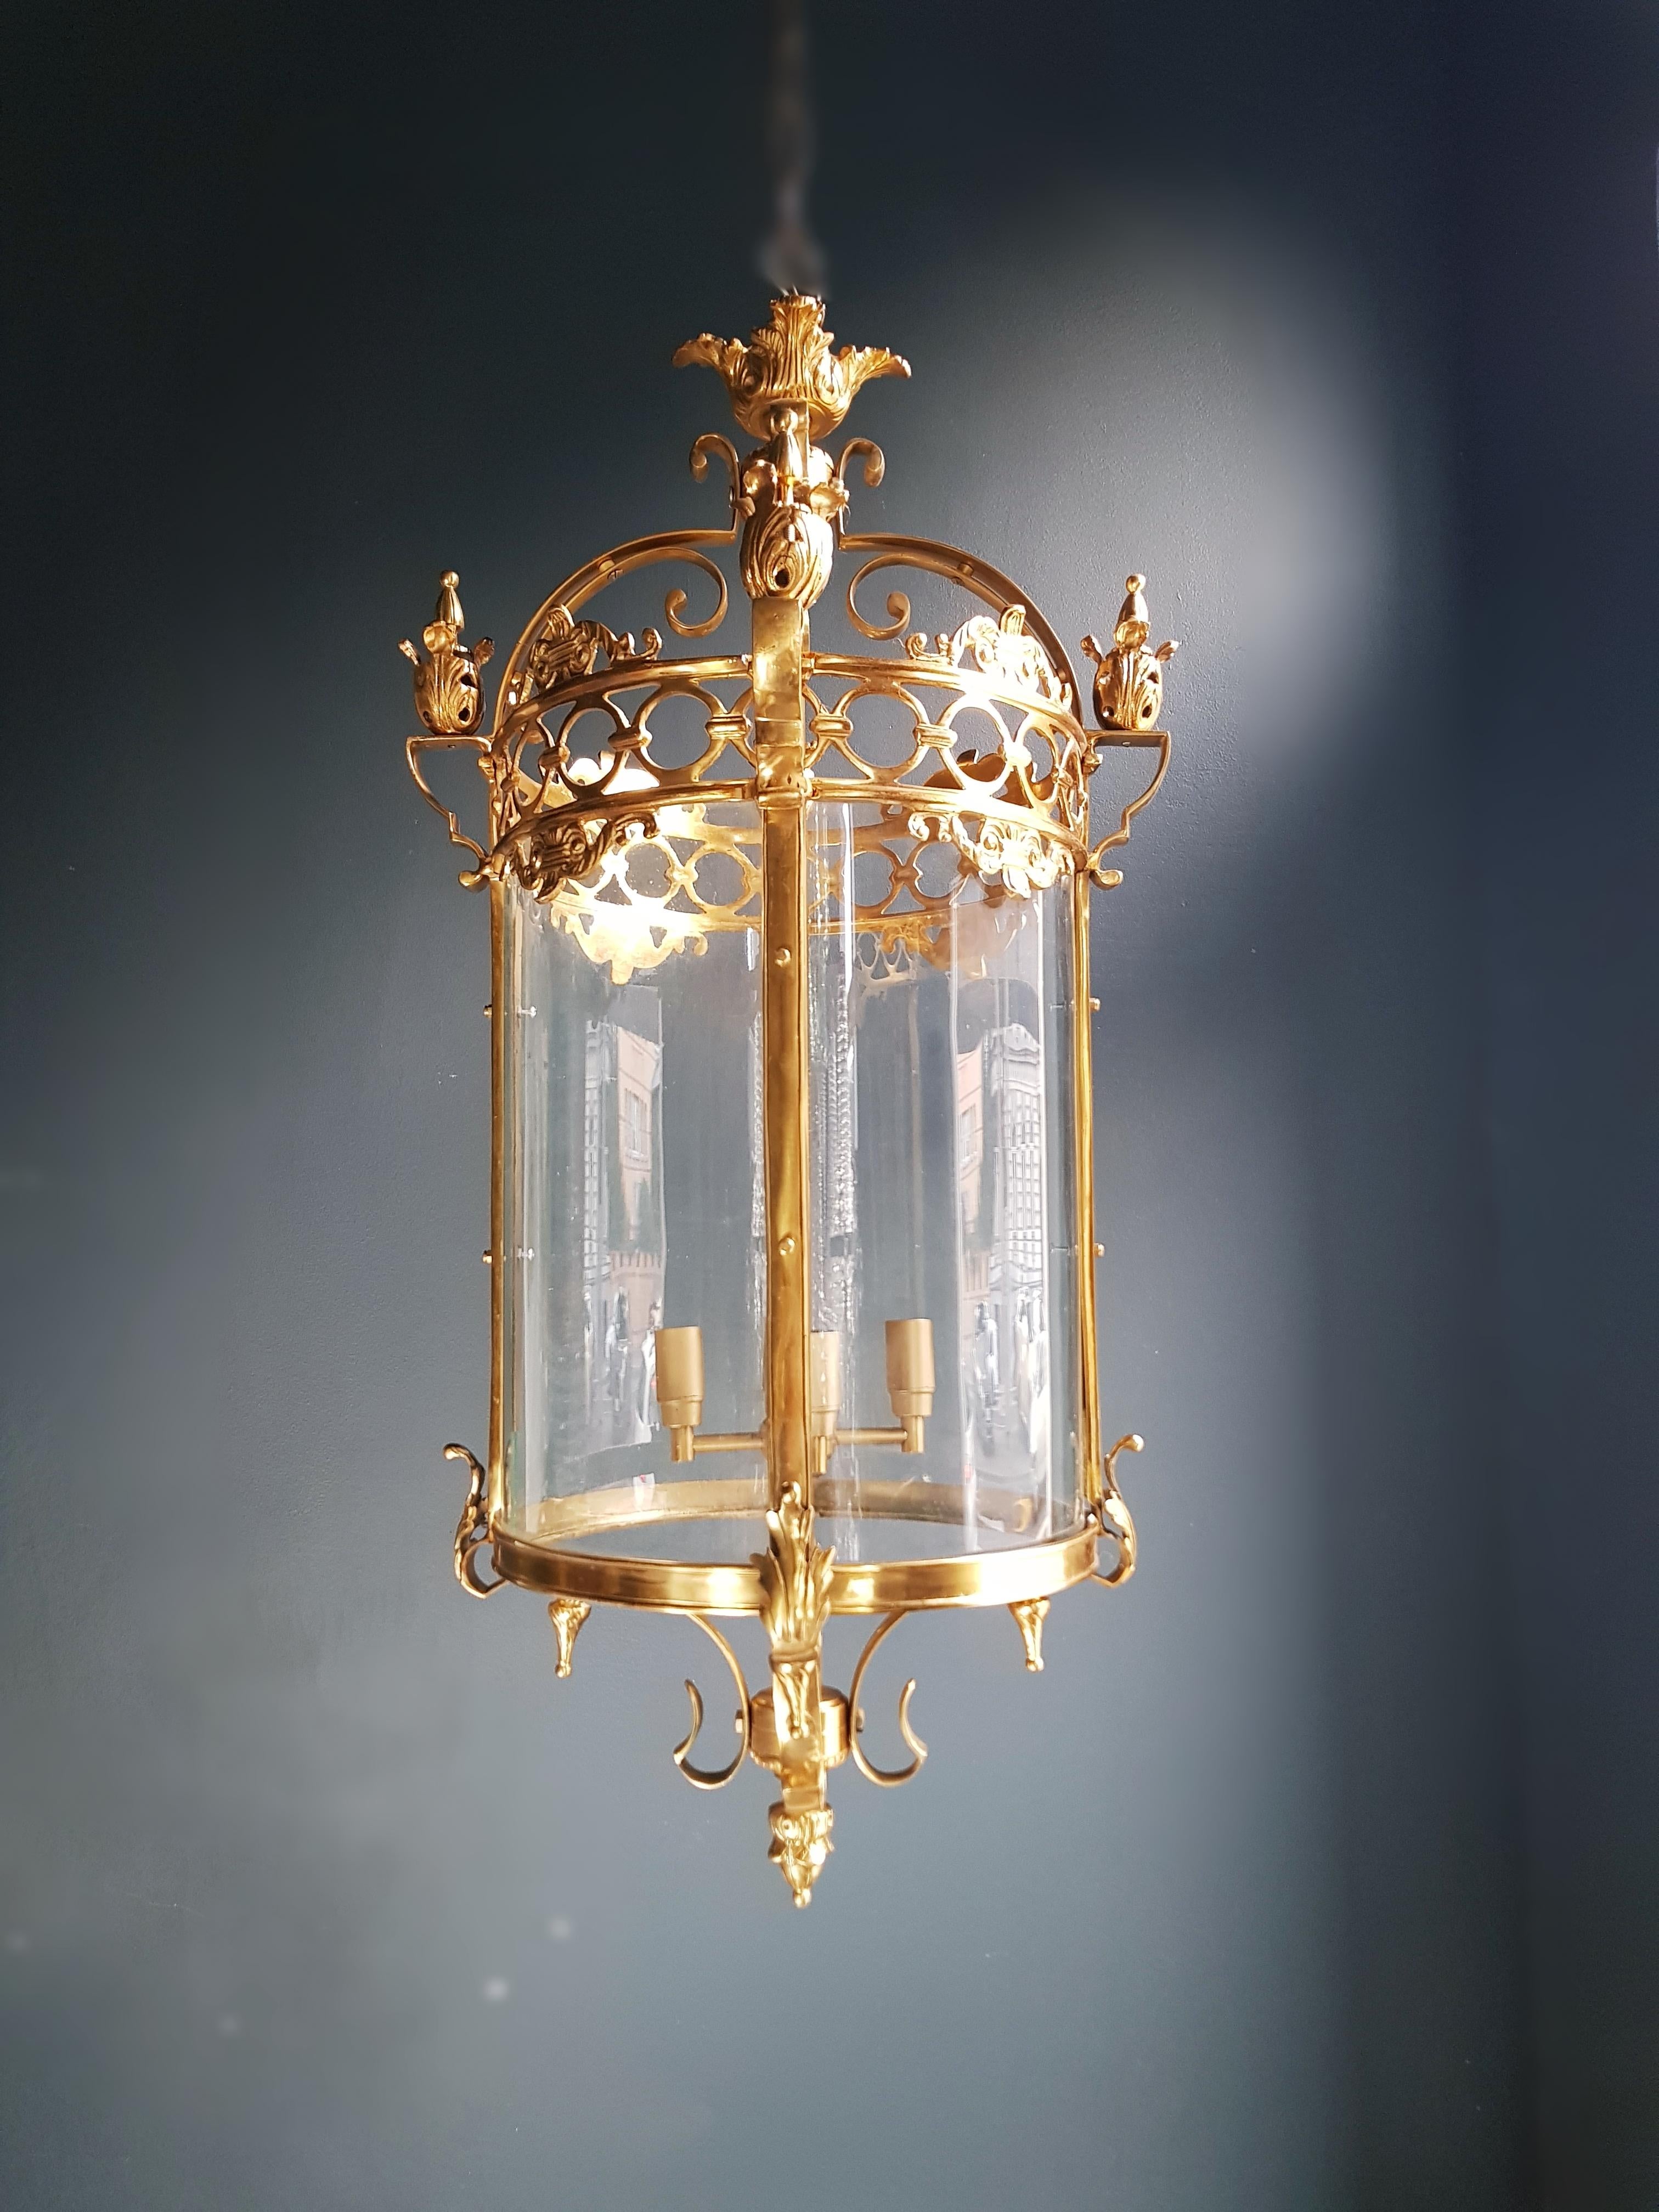 Large Cylindrical Lantern in Louis XVI Style Brass Glass Pendant Lighting For Sale 1